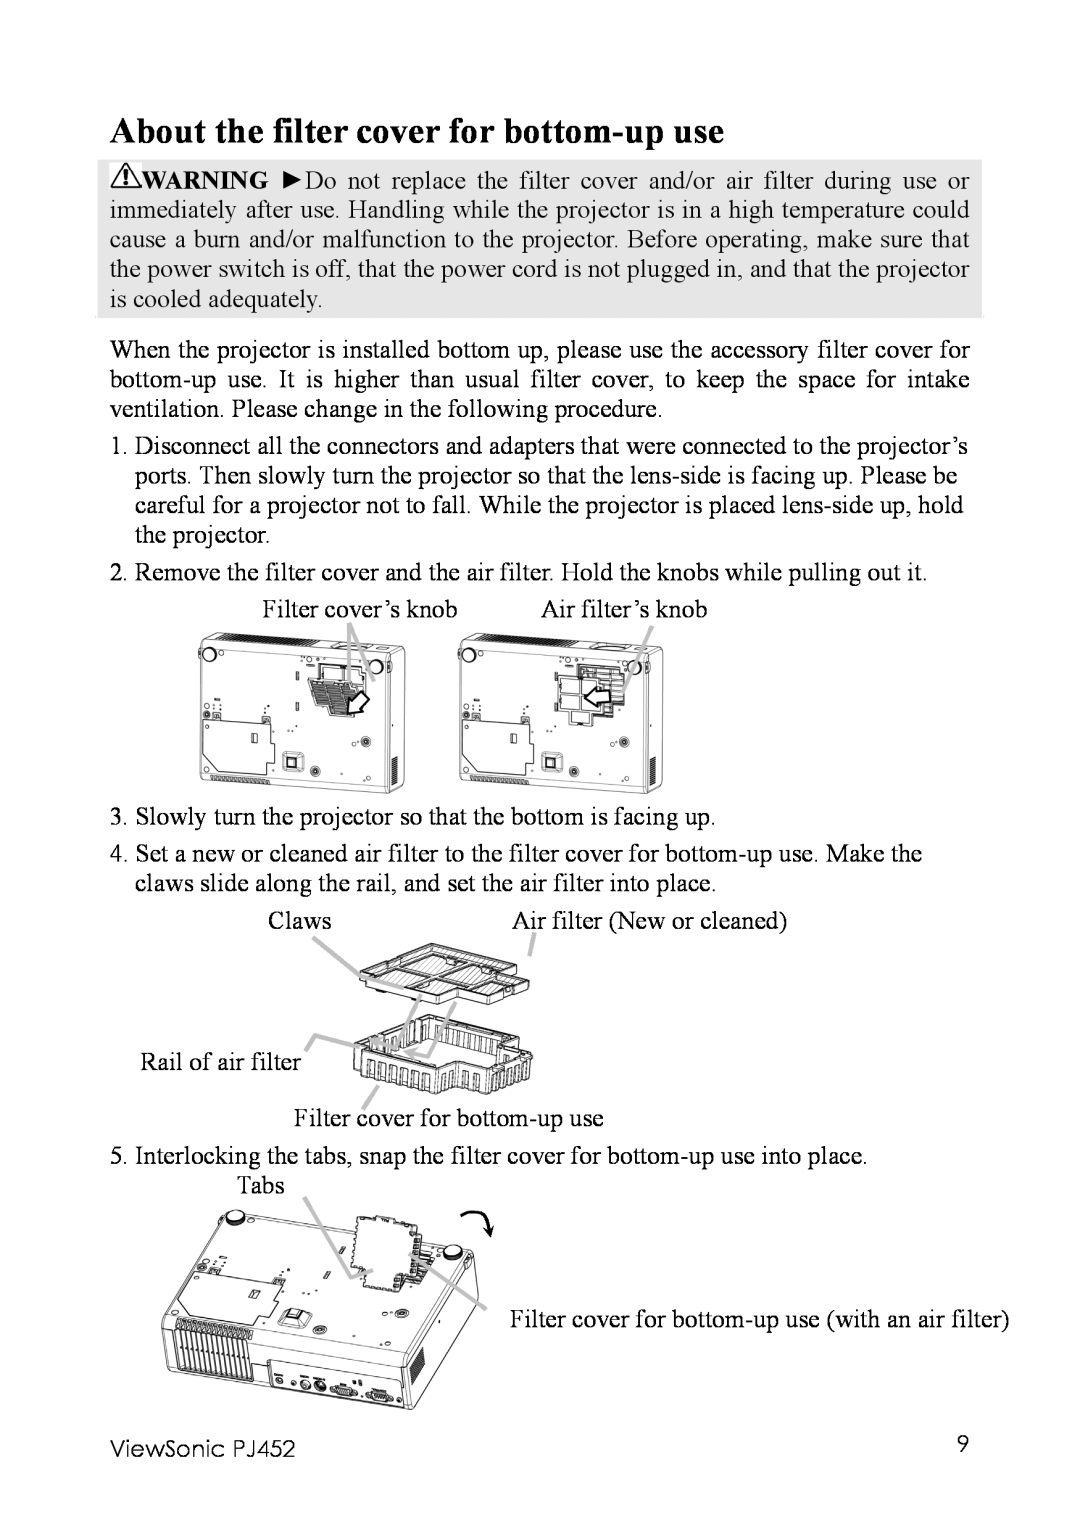 ViewSonic PJ452 manual About the filter cover for bottom-upuse 